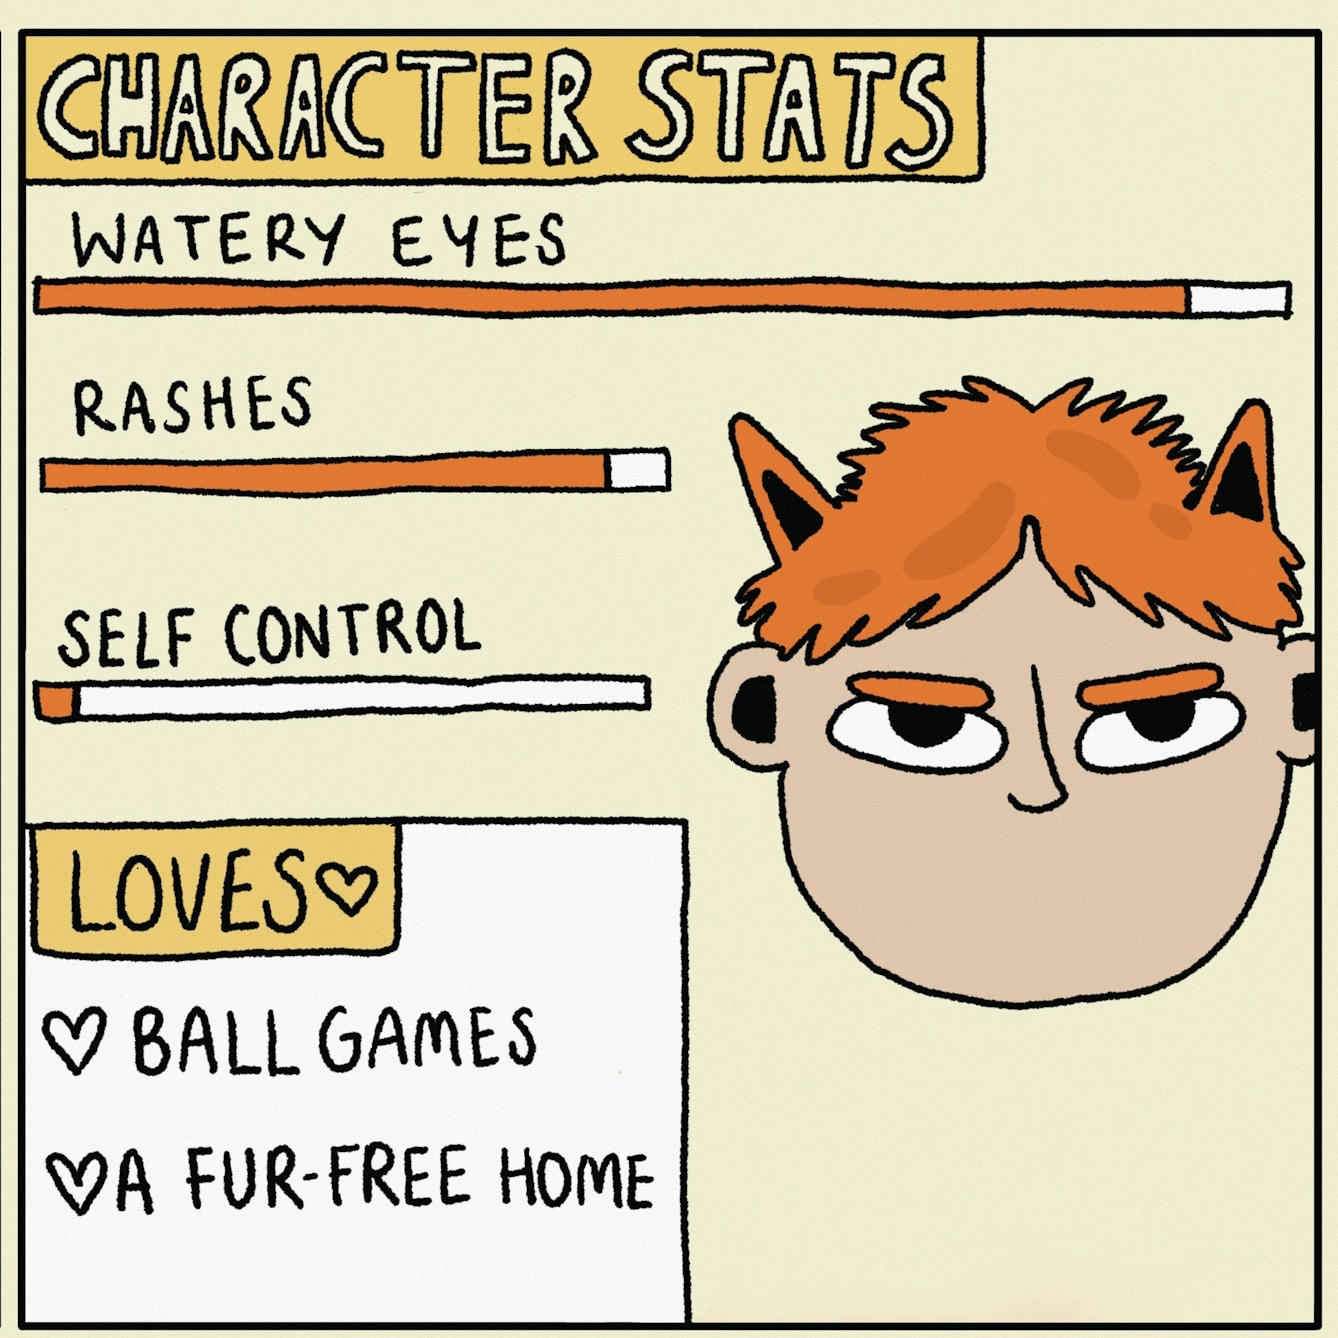 Panel 2 of a digitally drawn, four-panel comic titled ‘Zoning’. The text at the top says ‘CHARACTER STATS’. The sliders show your character suffers badly with watery eyes, rashes and has little self-control, plus they love ball games and a fur-free home.